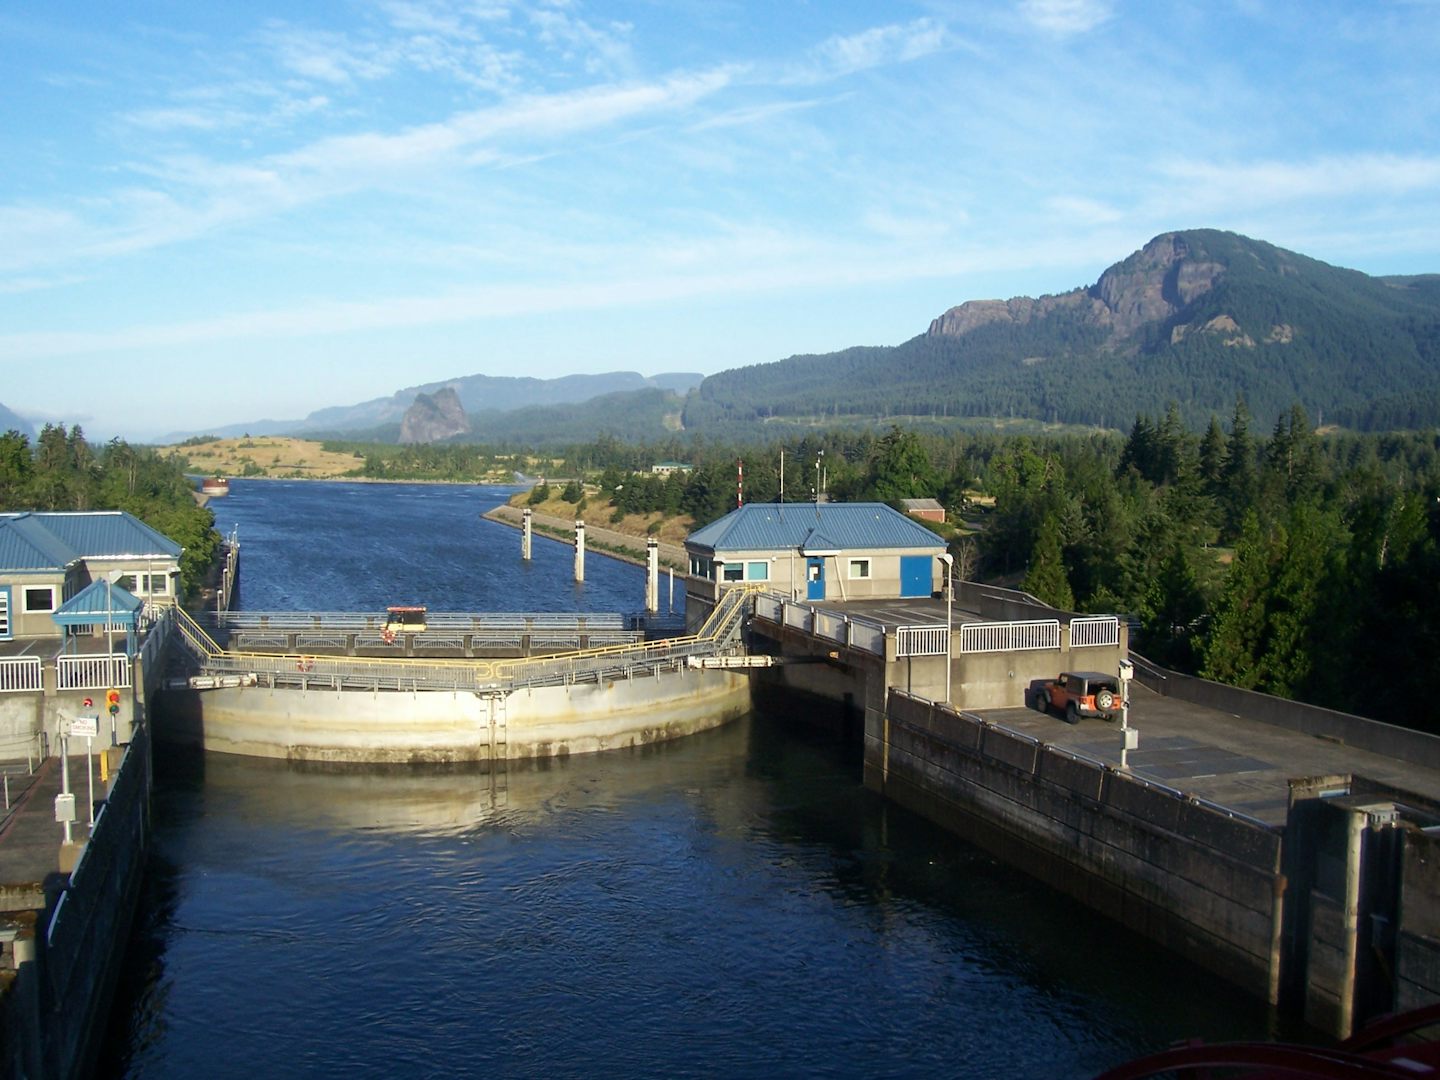 First Lock on Columbia River 50 miles east of Portland.